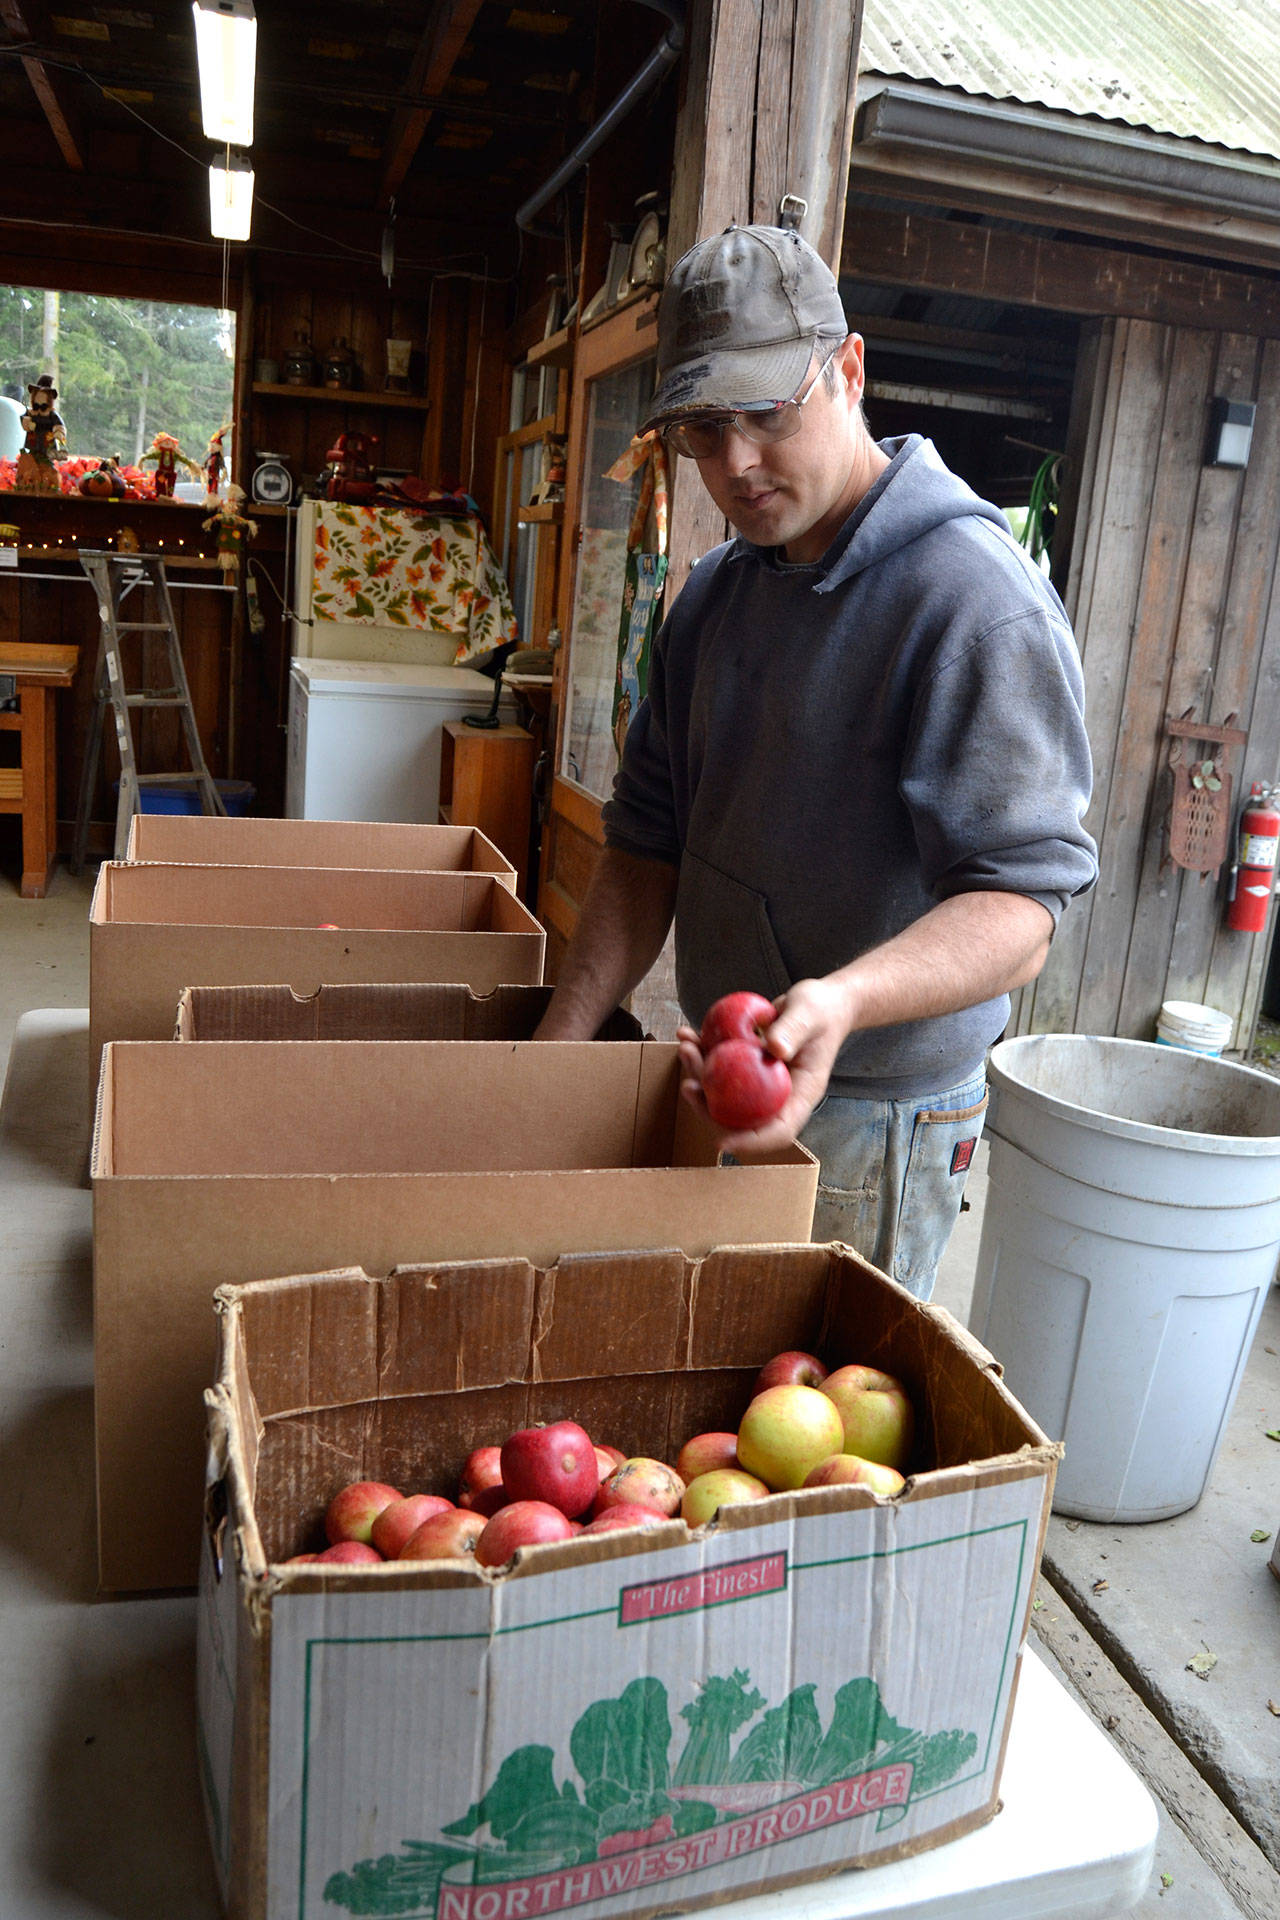 Graeme Johnson looks for the best Gravenstein apples for cider at Lazy J Tree Farm. He and other crew members make cider typically on rainy days, and it’s available year-round from the farm, including at the Clallam County Farm Tour on Sept. 29. Sequim Gazette photo by Matthew Nash